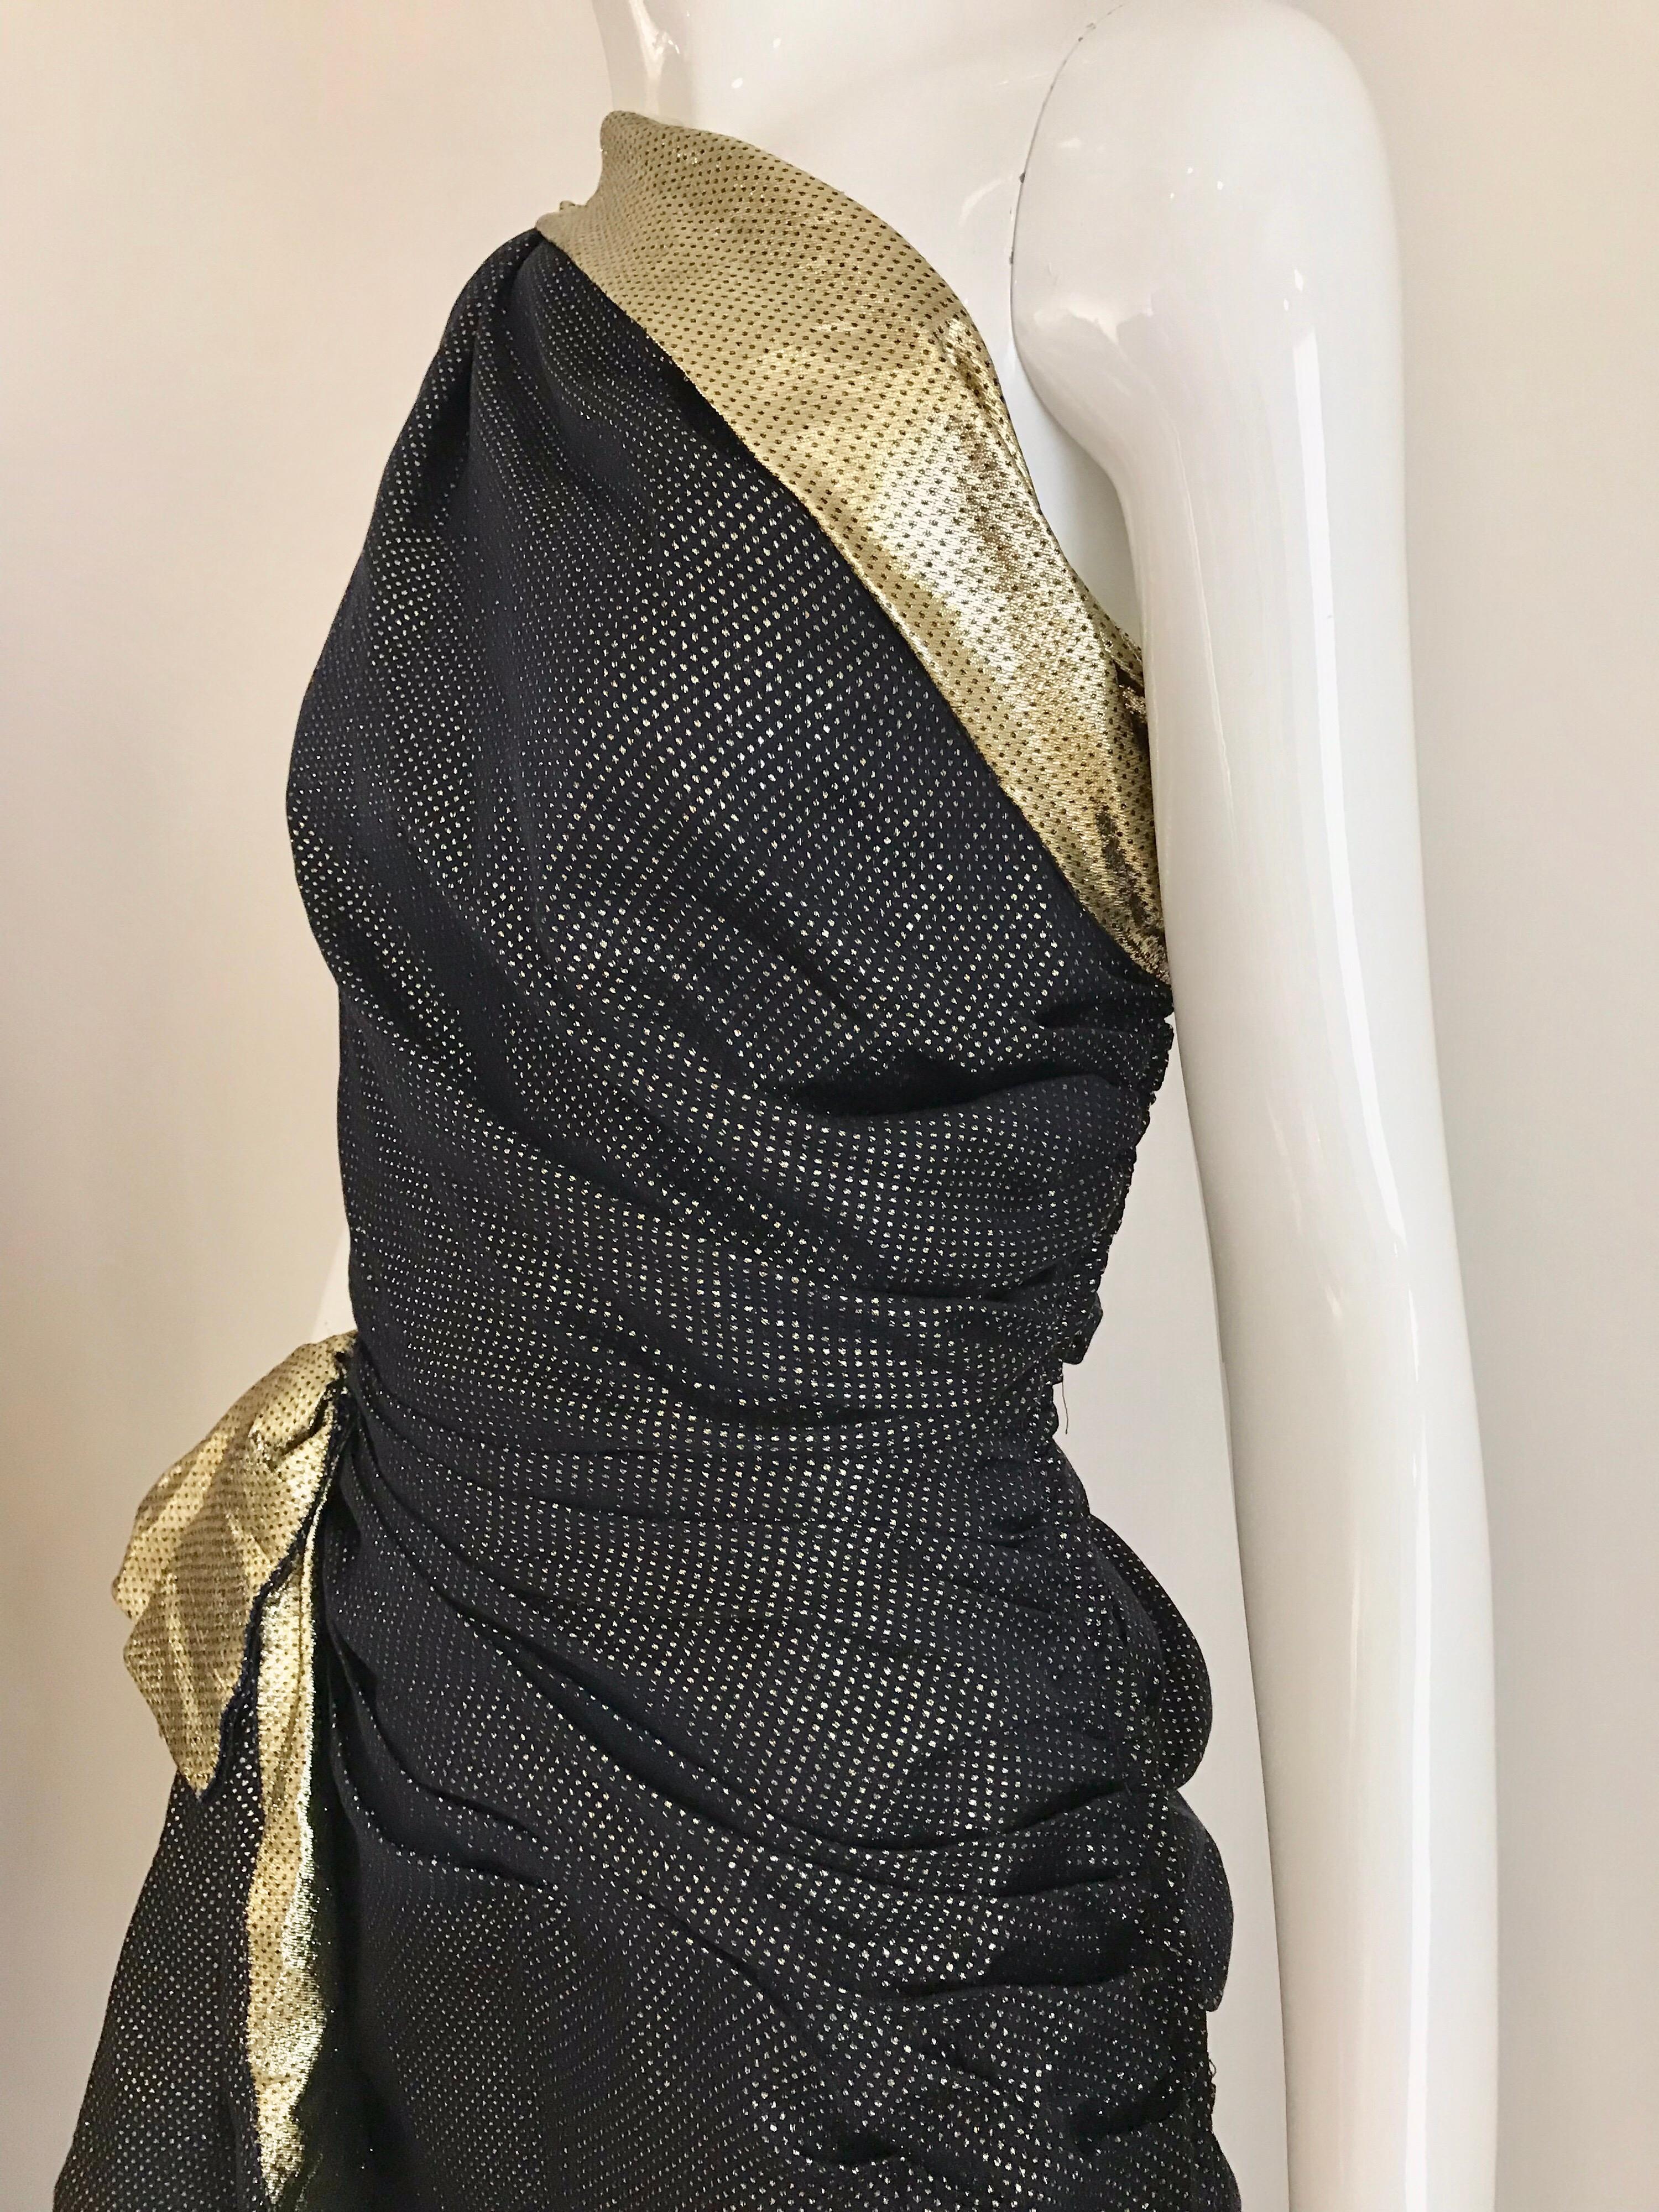 Elegant Vintage Vicky Tiel navy blue and gold silk lamé one shoulder gown. Zips on the side with 8” side slit. 
Measurement: 
Bust: 36 inches / Waist: 28 inches/ Hip: 34 inches/ Dress length: 59 inches